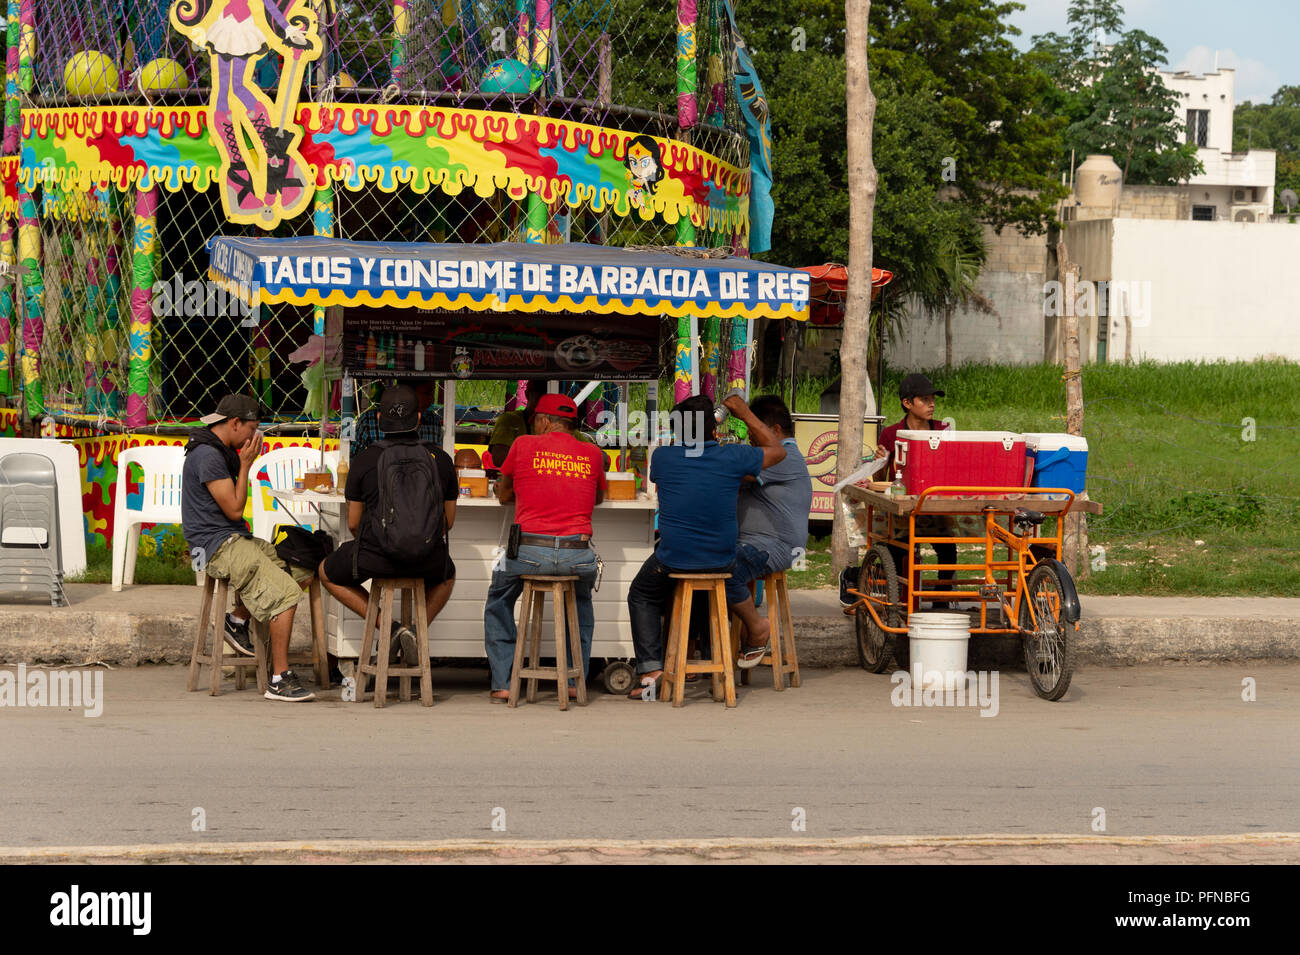 Tulum, Mexico - 7 August 2018: People eating tacos at a colorful mexican food stand. Stock Photo